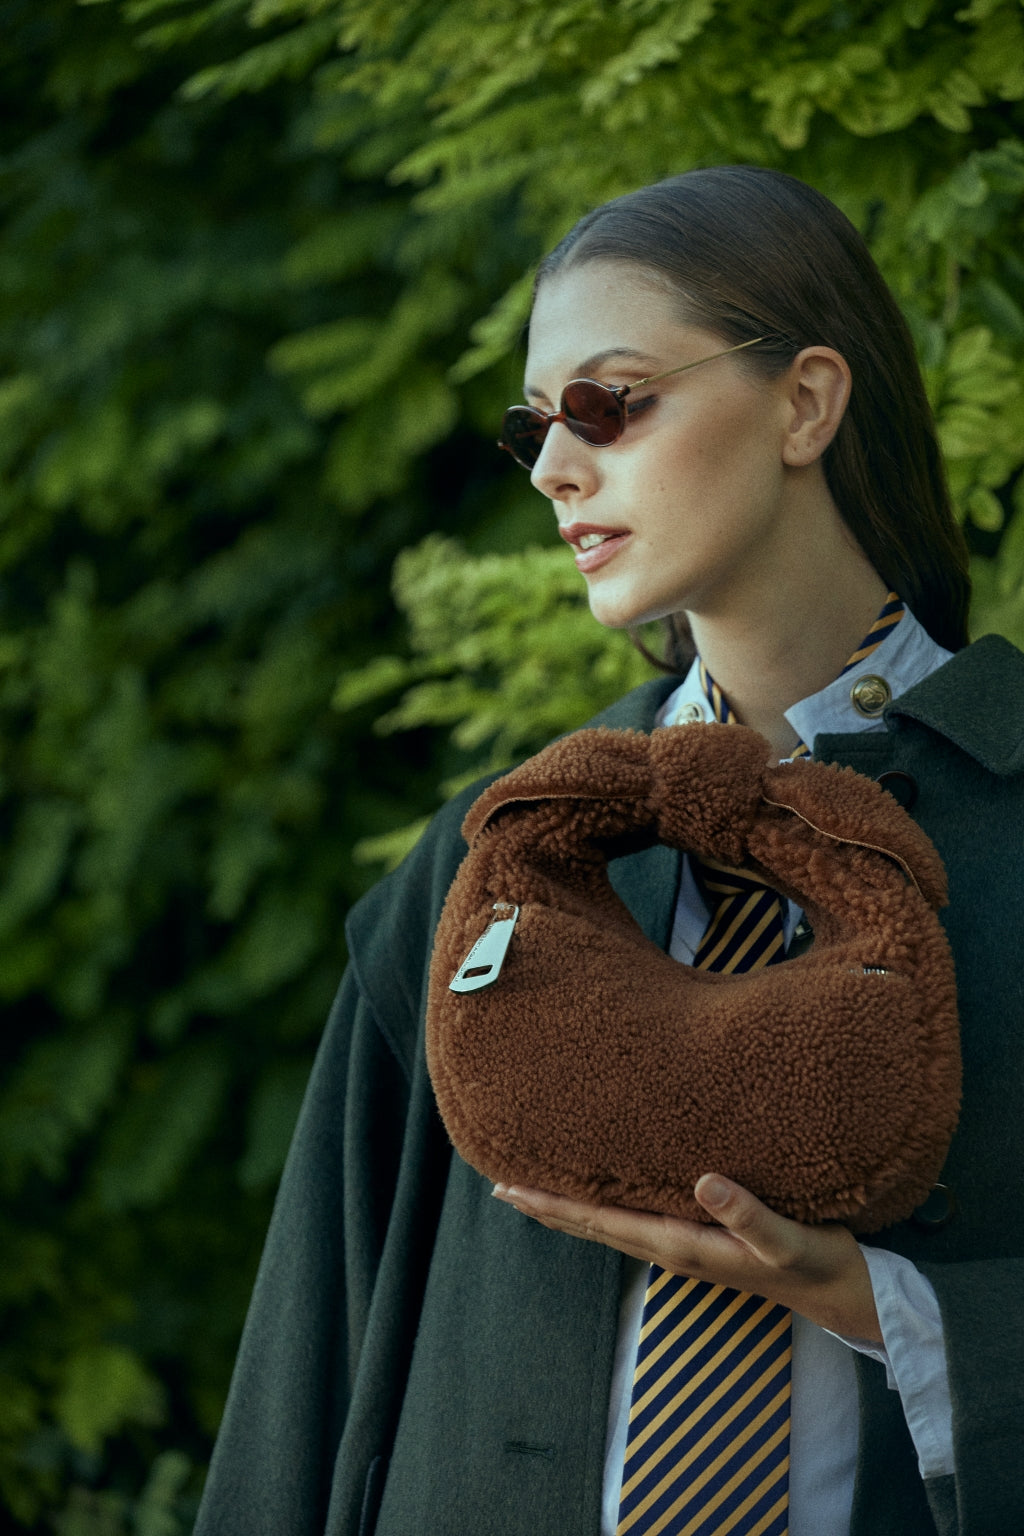 Person wearing sunglasses holding a brown plush handbag against a leafy green background